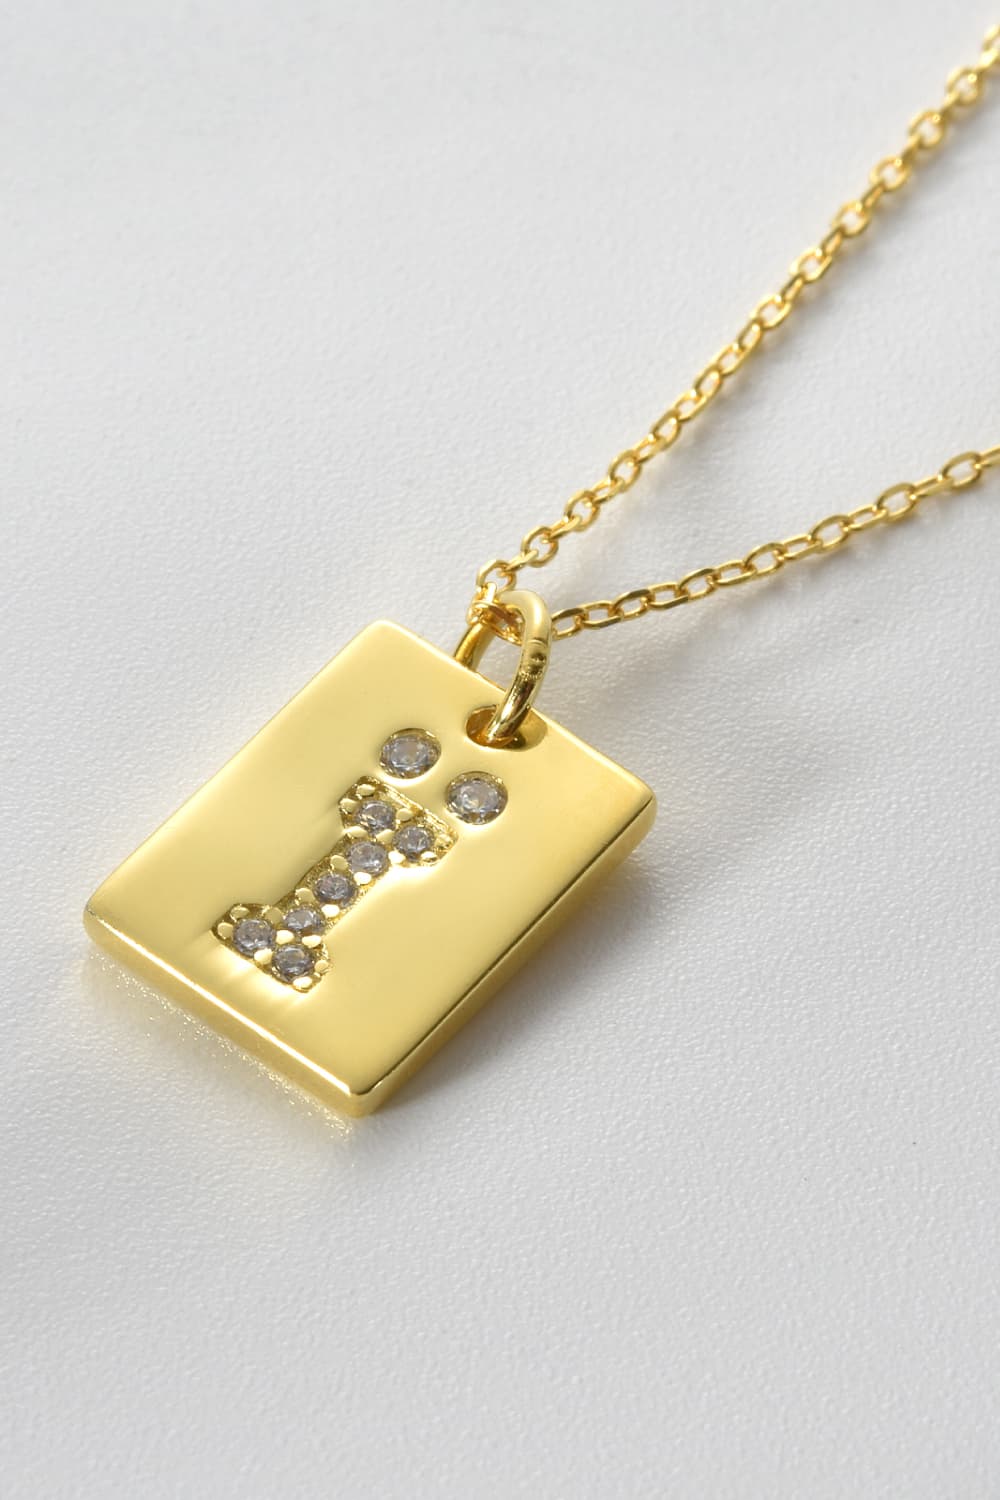 Inlaid Zircon Rectangle Pendant Necklace king-general-store-5710.myshopify.com